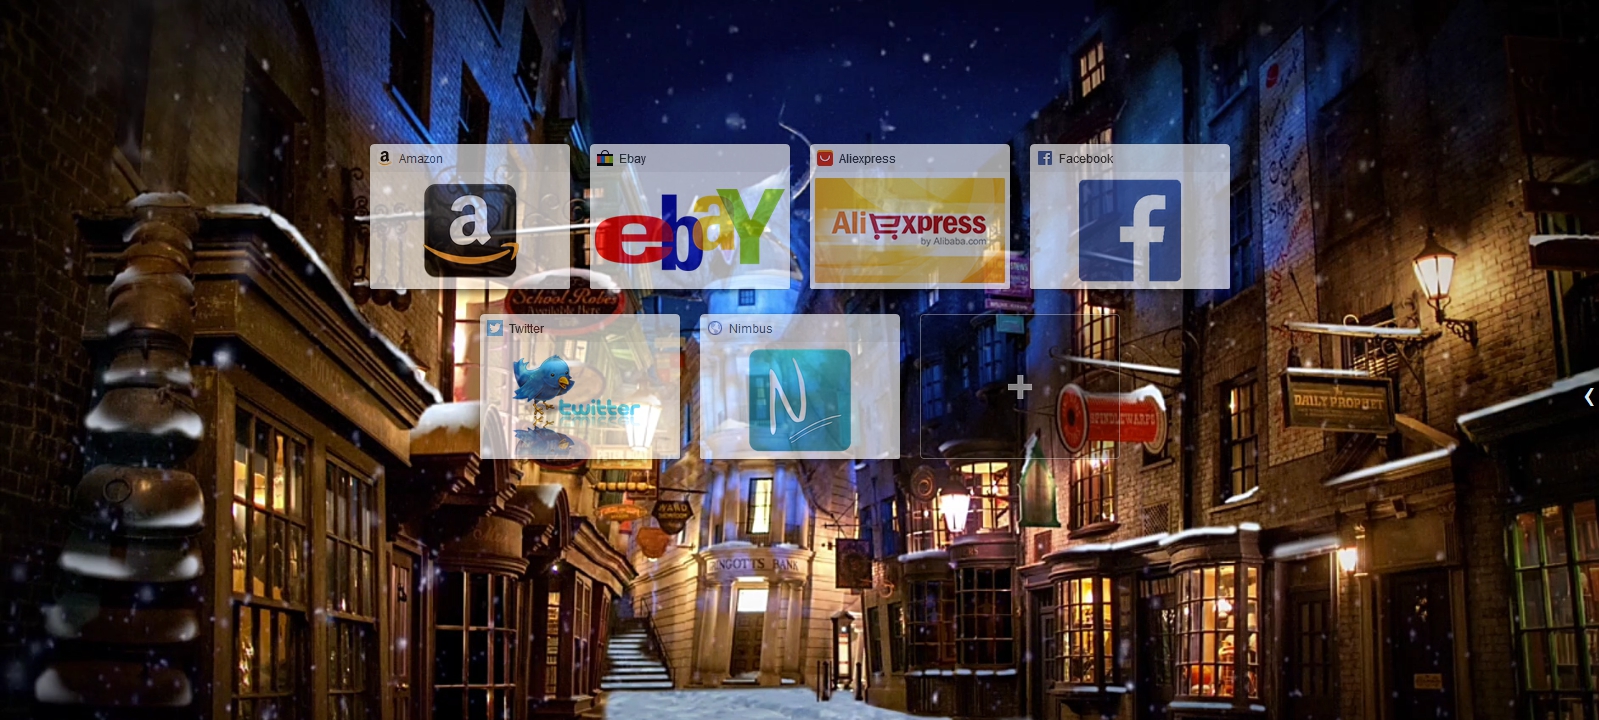 Mozilla Firefox Version And New Awesome Live Wallpapers - Diagon Alley Snow , HD Wallpaper & Backgrounds